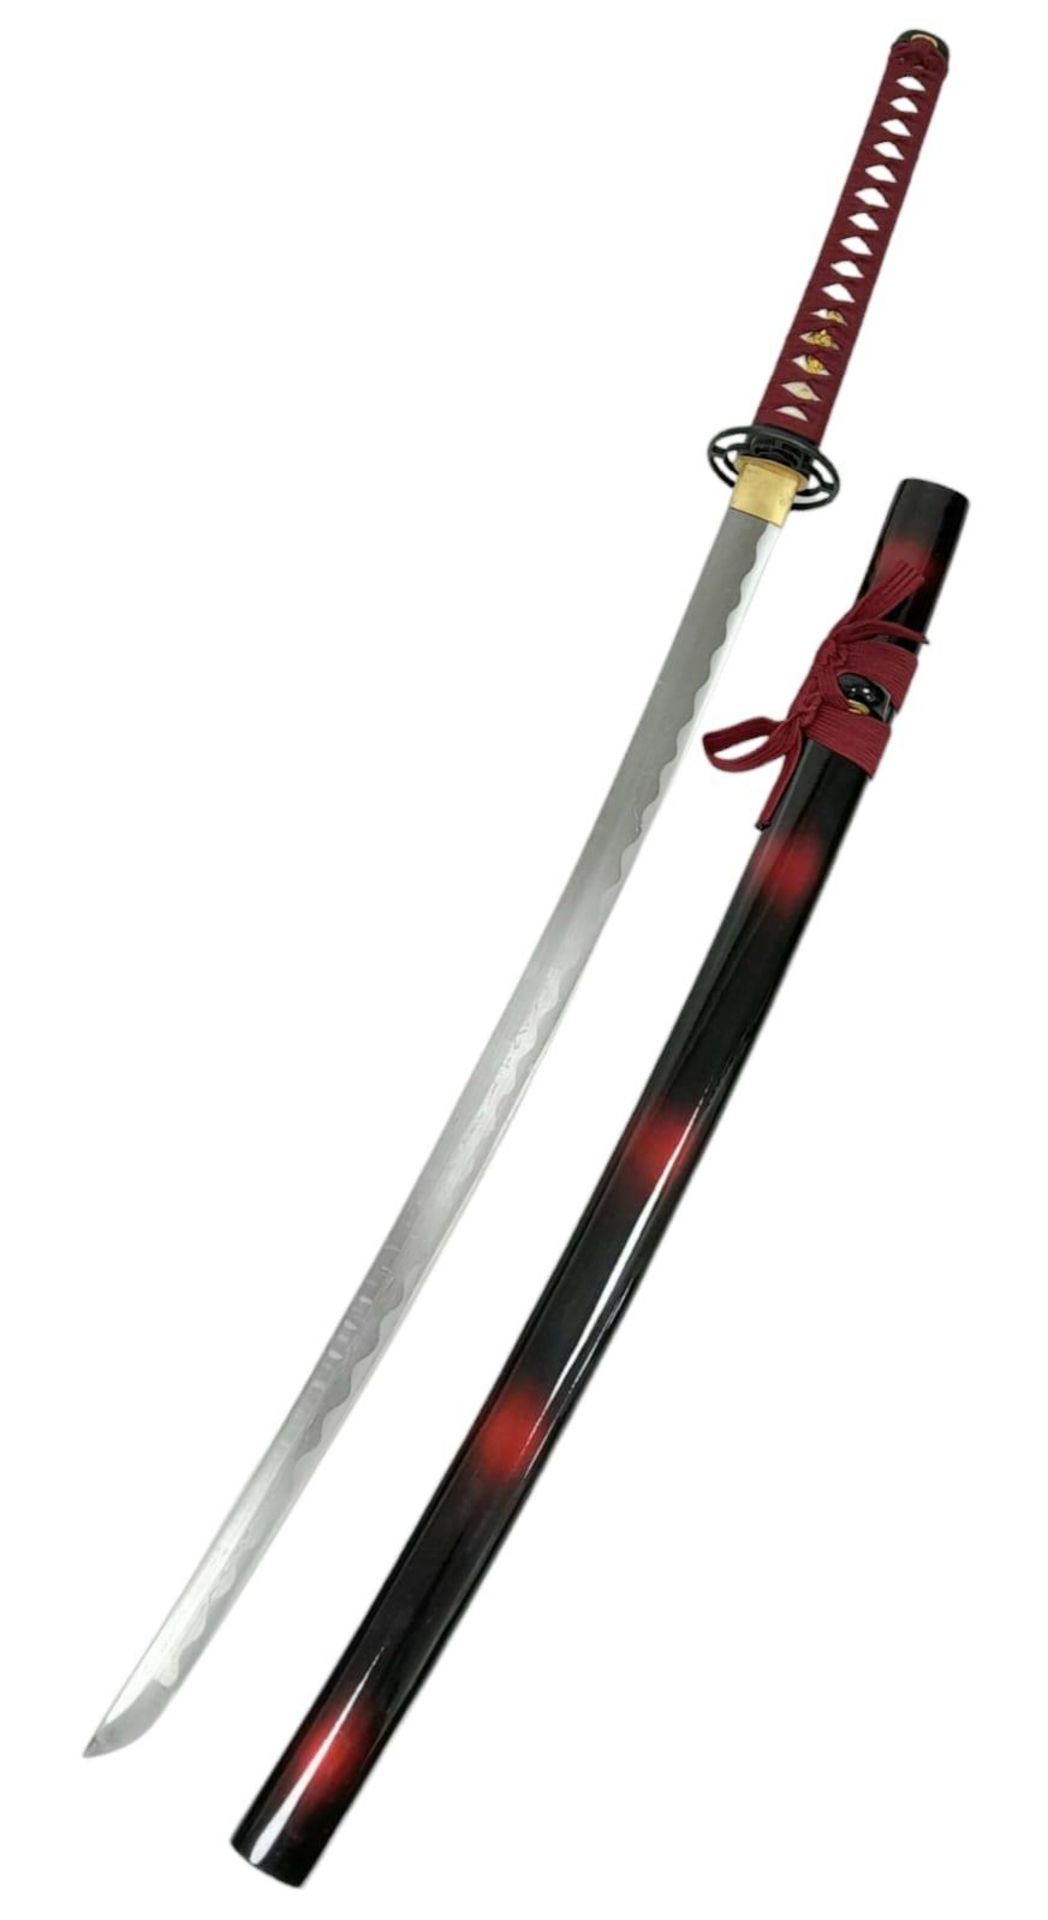 An Excellent Condition Modern Display Japanese Katana. 104cm Length. Iron Tsuba, Red and Black